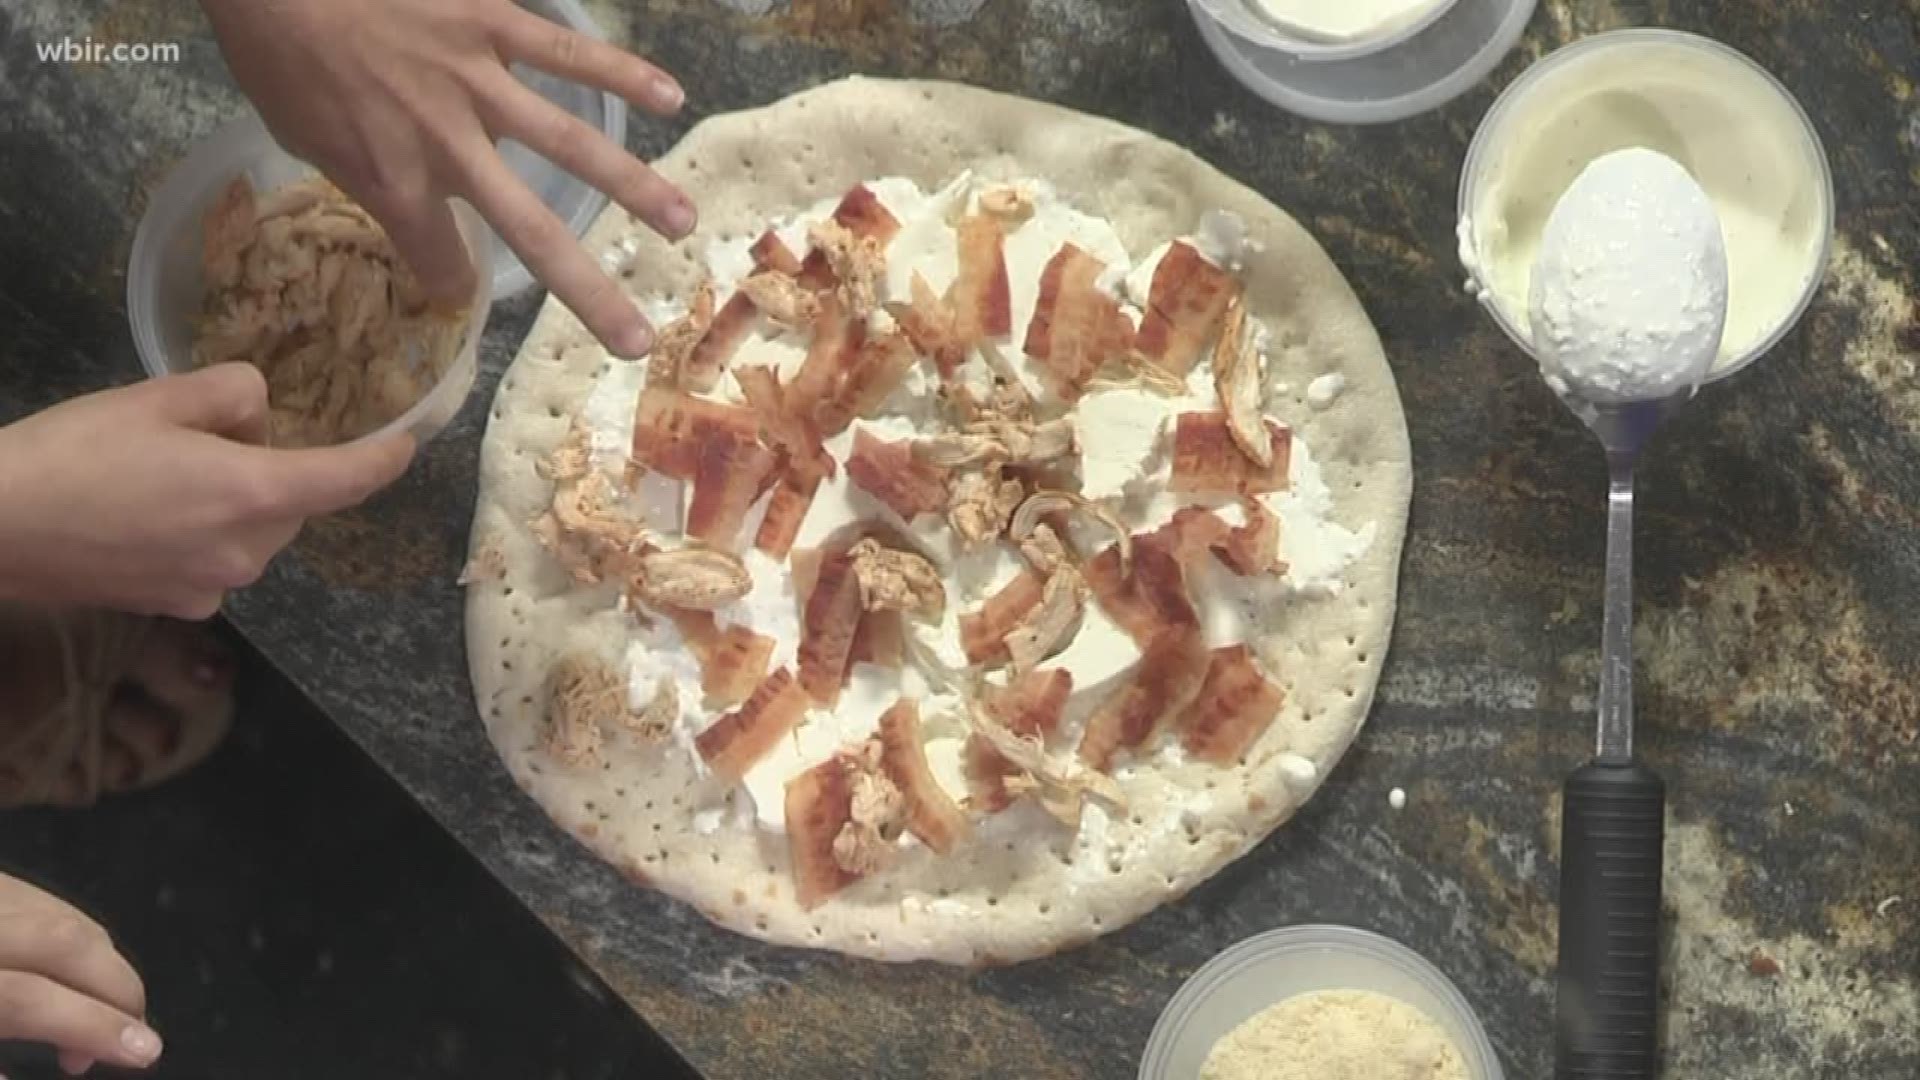 Hard Knox Pizzeria shares how to make the Do It For Pruitt pizza